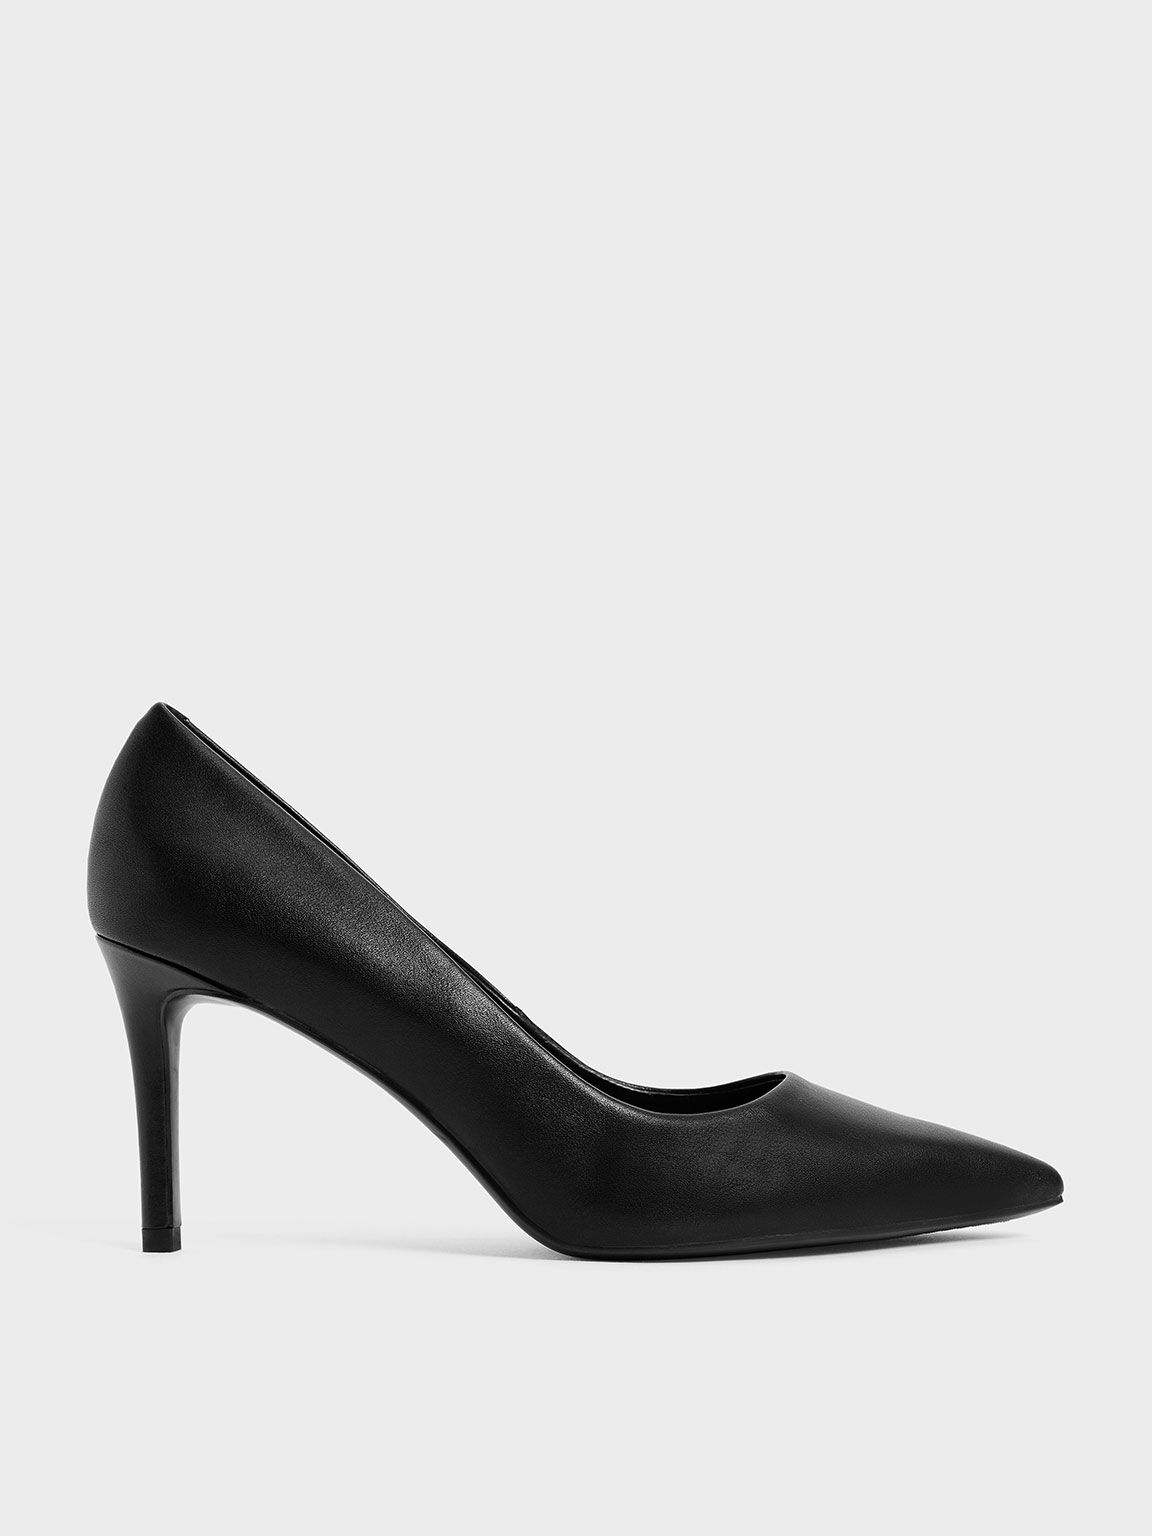 Ultimate Tag et bad alliance Black Emmy Pointed-Toe Pumps - CHARLES & KEITH PH